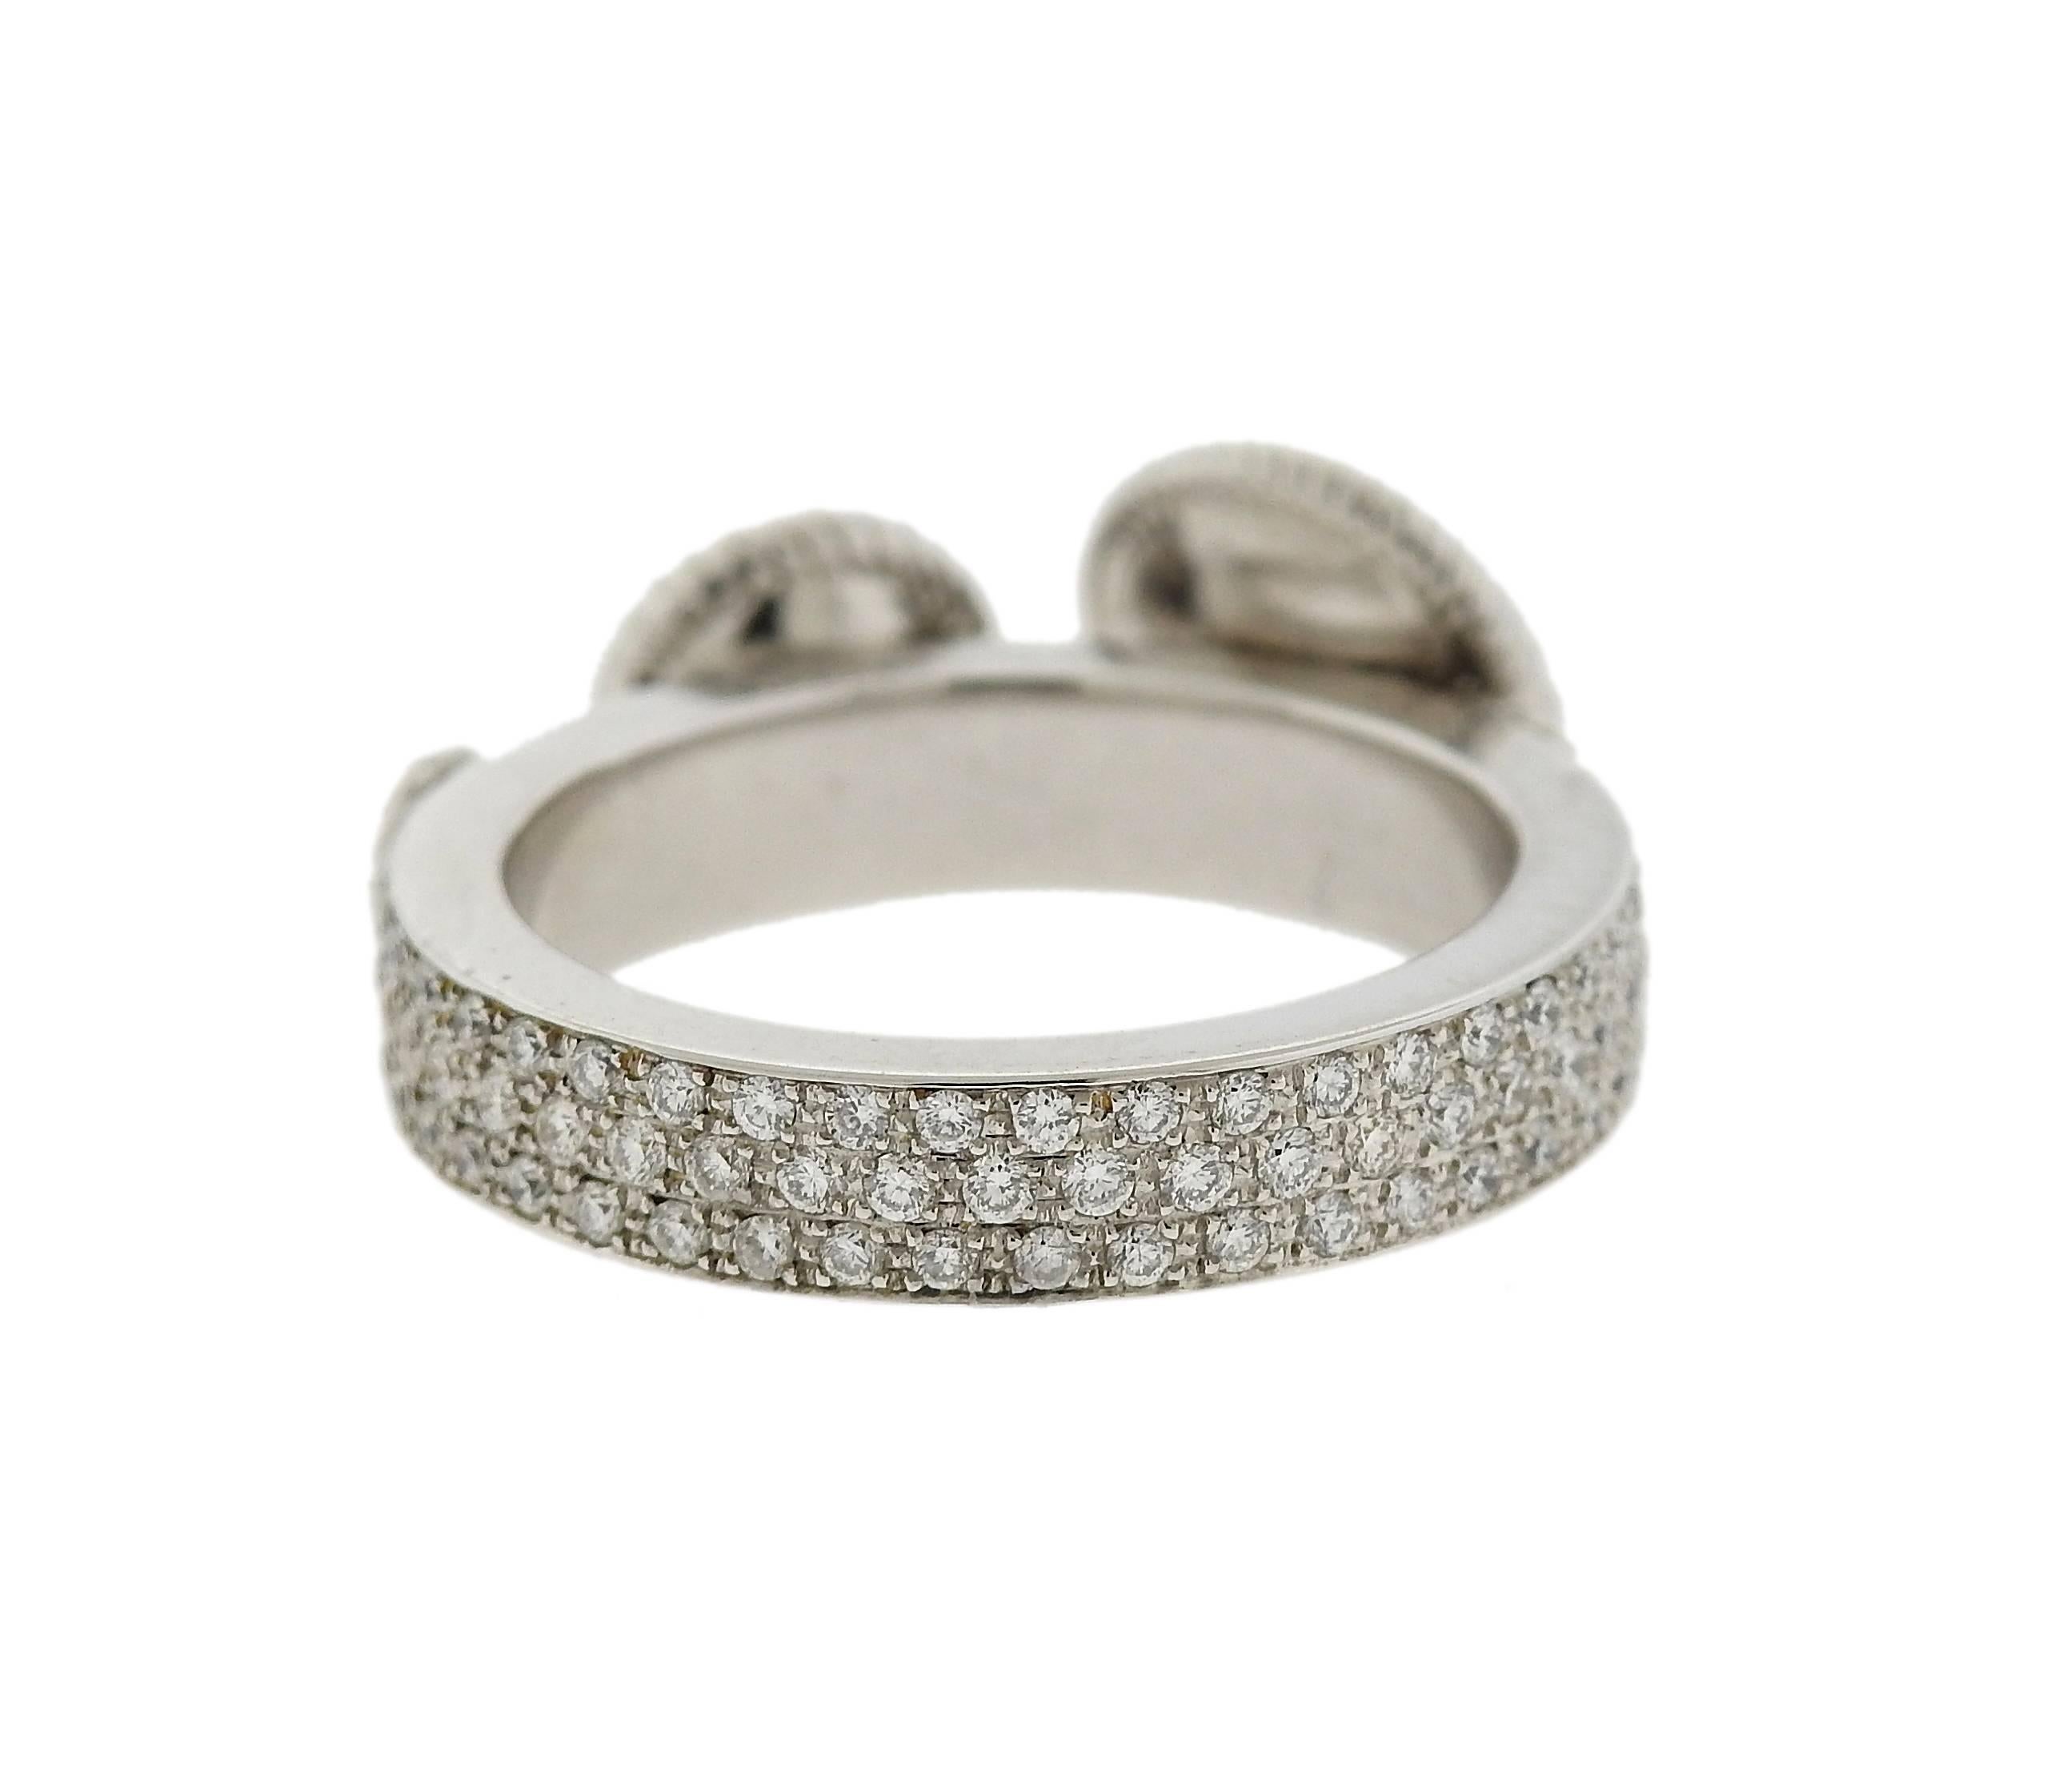 Lovely 18k white gold ring crafted by Carrera y Carrera for the Pasodoble collection. Featuring approximately 0.71ctw of FG/VS diamonds. Ring Size - 6.5, 9.7mm Widest Point (*top balls are movable and slide on the top*). Marked Carrera Y Carrera